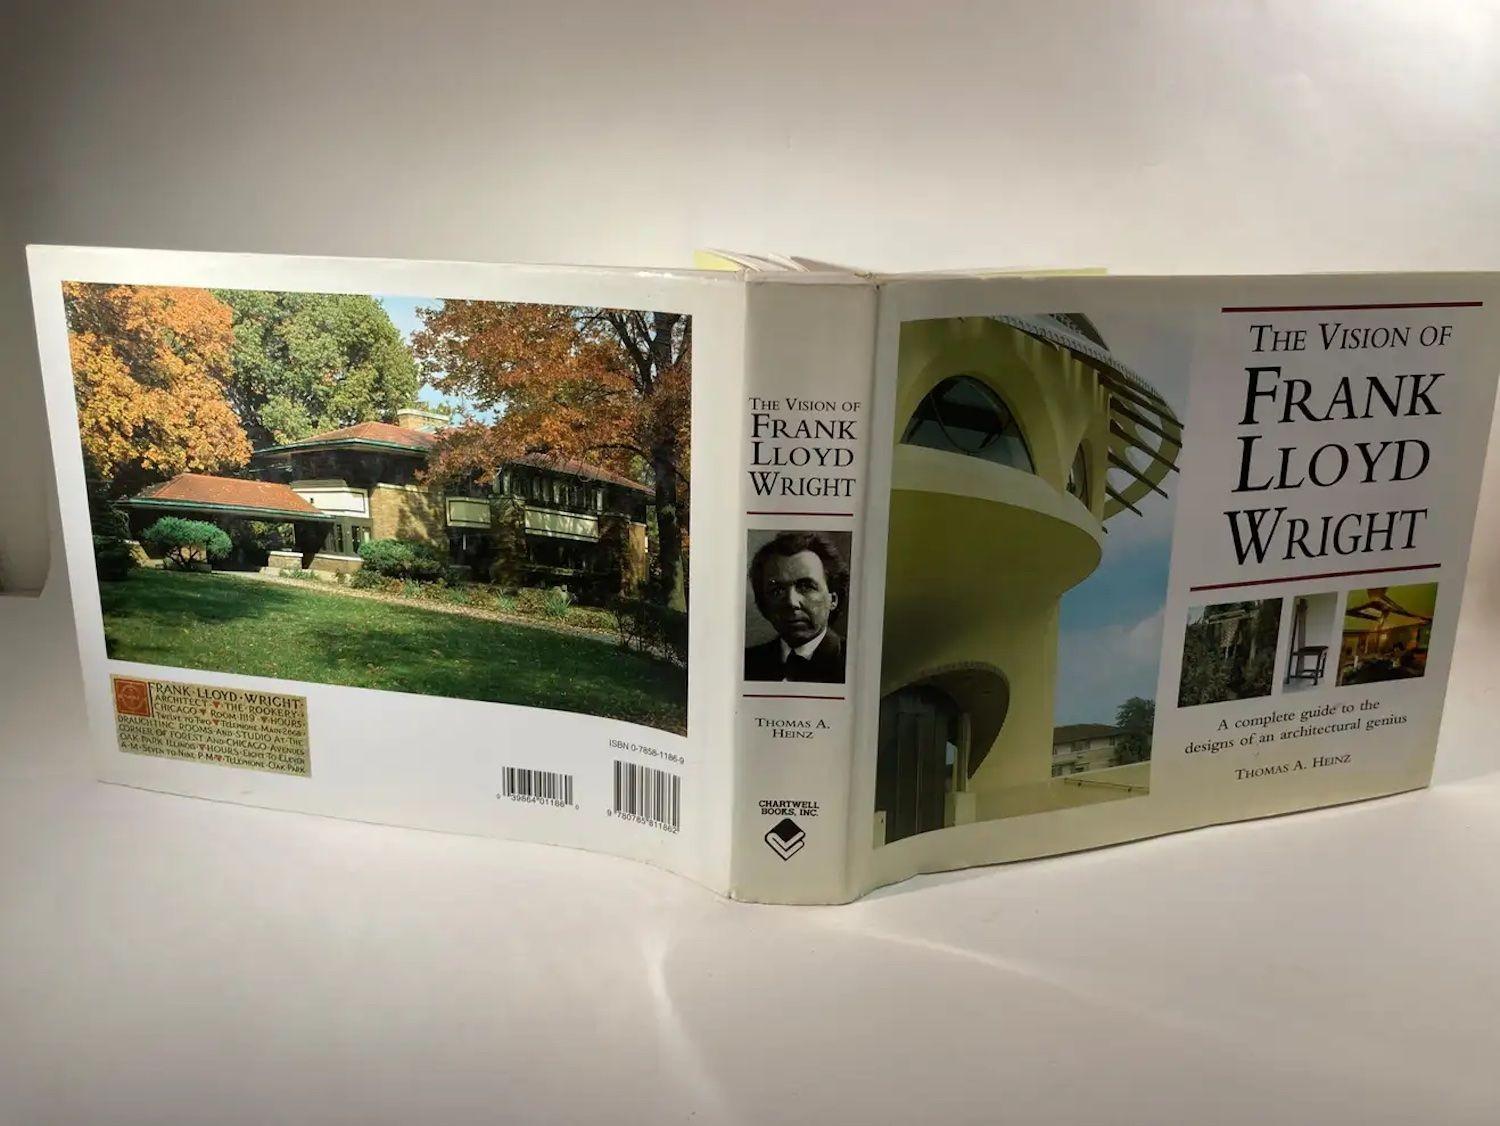 20th Century Vision of Frank Lloyd Wright by Thomas a. Heinz Hardcover Book 1st Edition For Sale